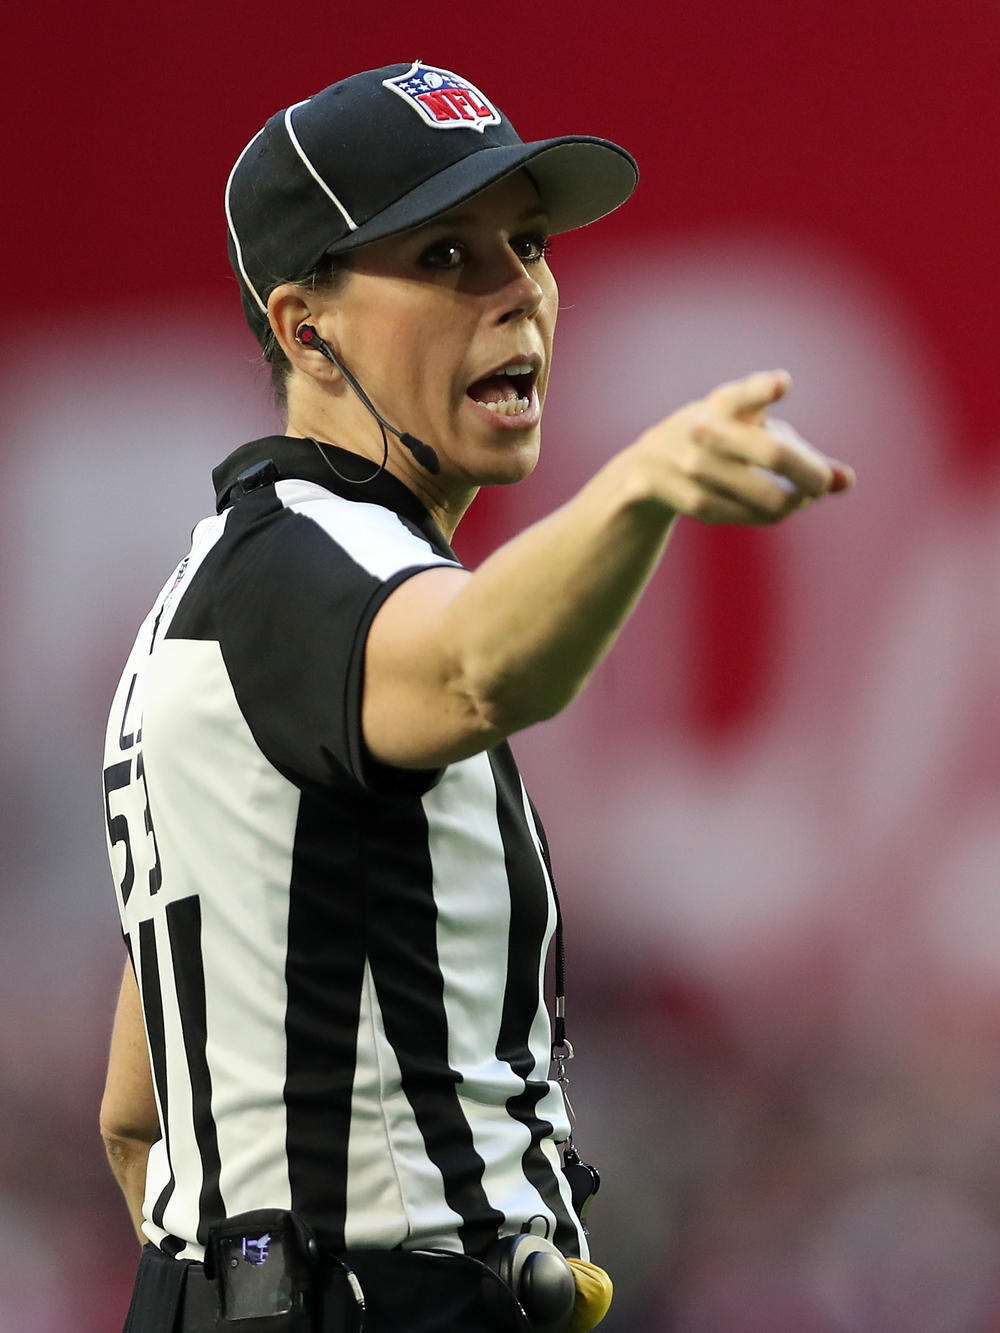 Sarah Thomas is no stranger to pressure situations. She's refereed in several playoff games and is looking forward to working her first Super Bowl on Sunday.